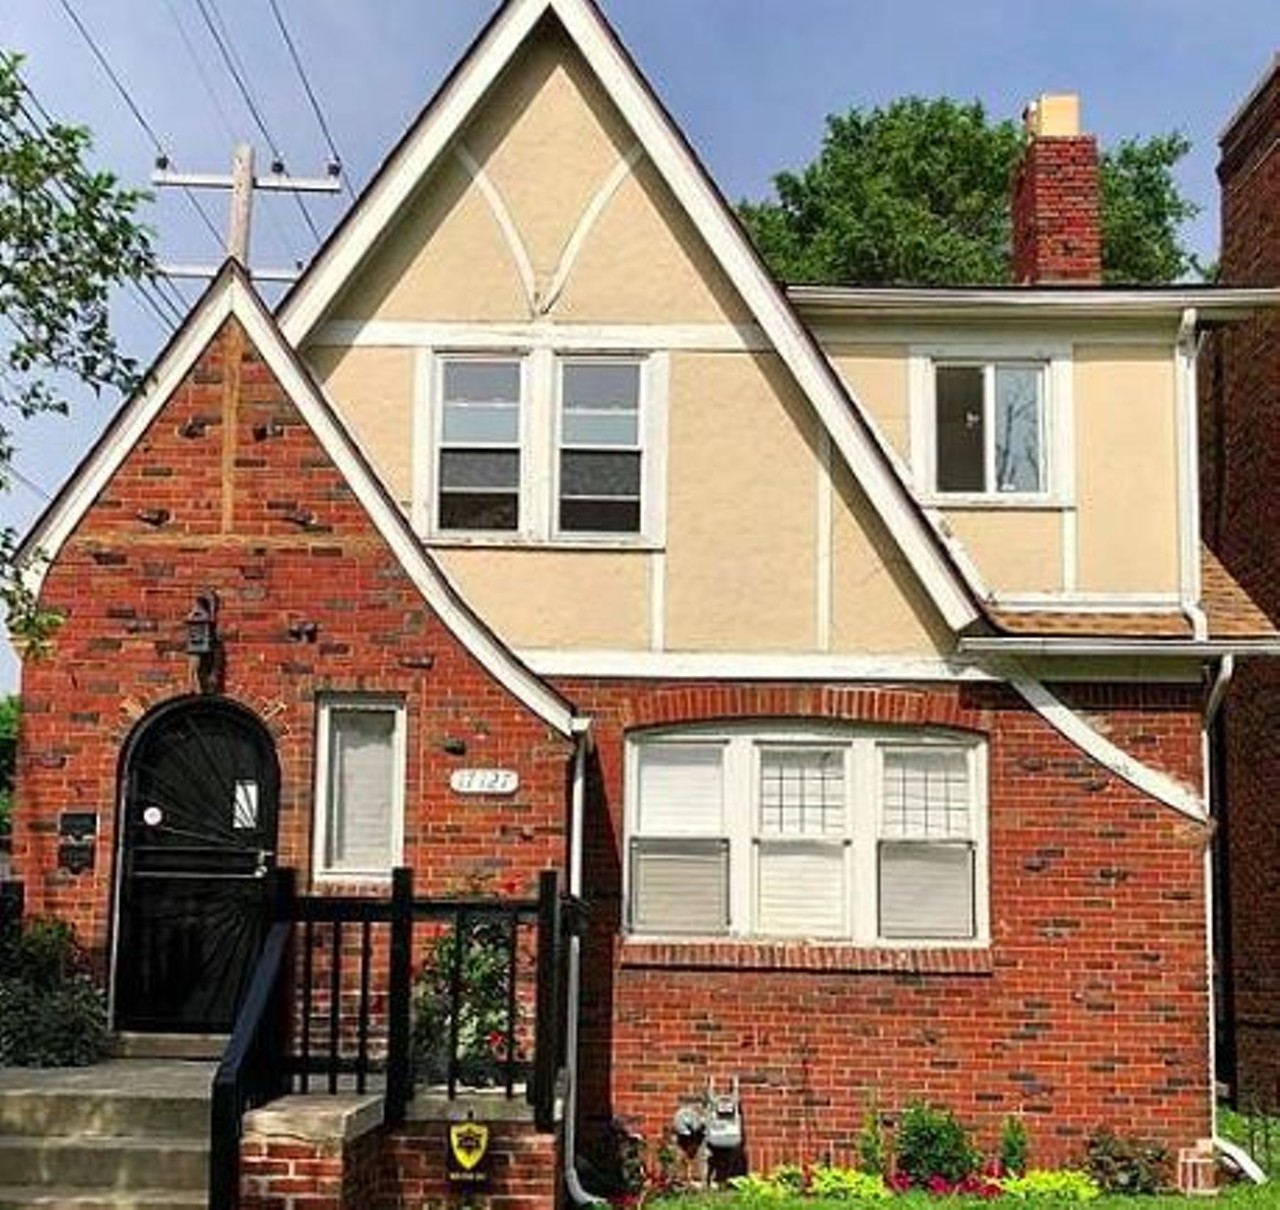 17127 Roselawn St.
$90,000
This private, yet unique home was featured on Curbed Detroit twice. It is a traditional brick home on the outside, and modern inside. It includes four bedrooms, new bathrooms, hardwood floors, an updated kitchen, and a security system.
Photo via Zillow